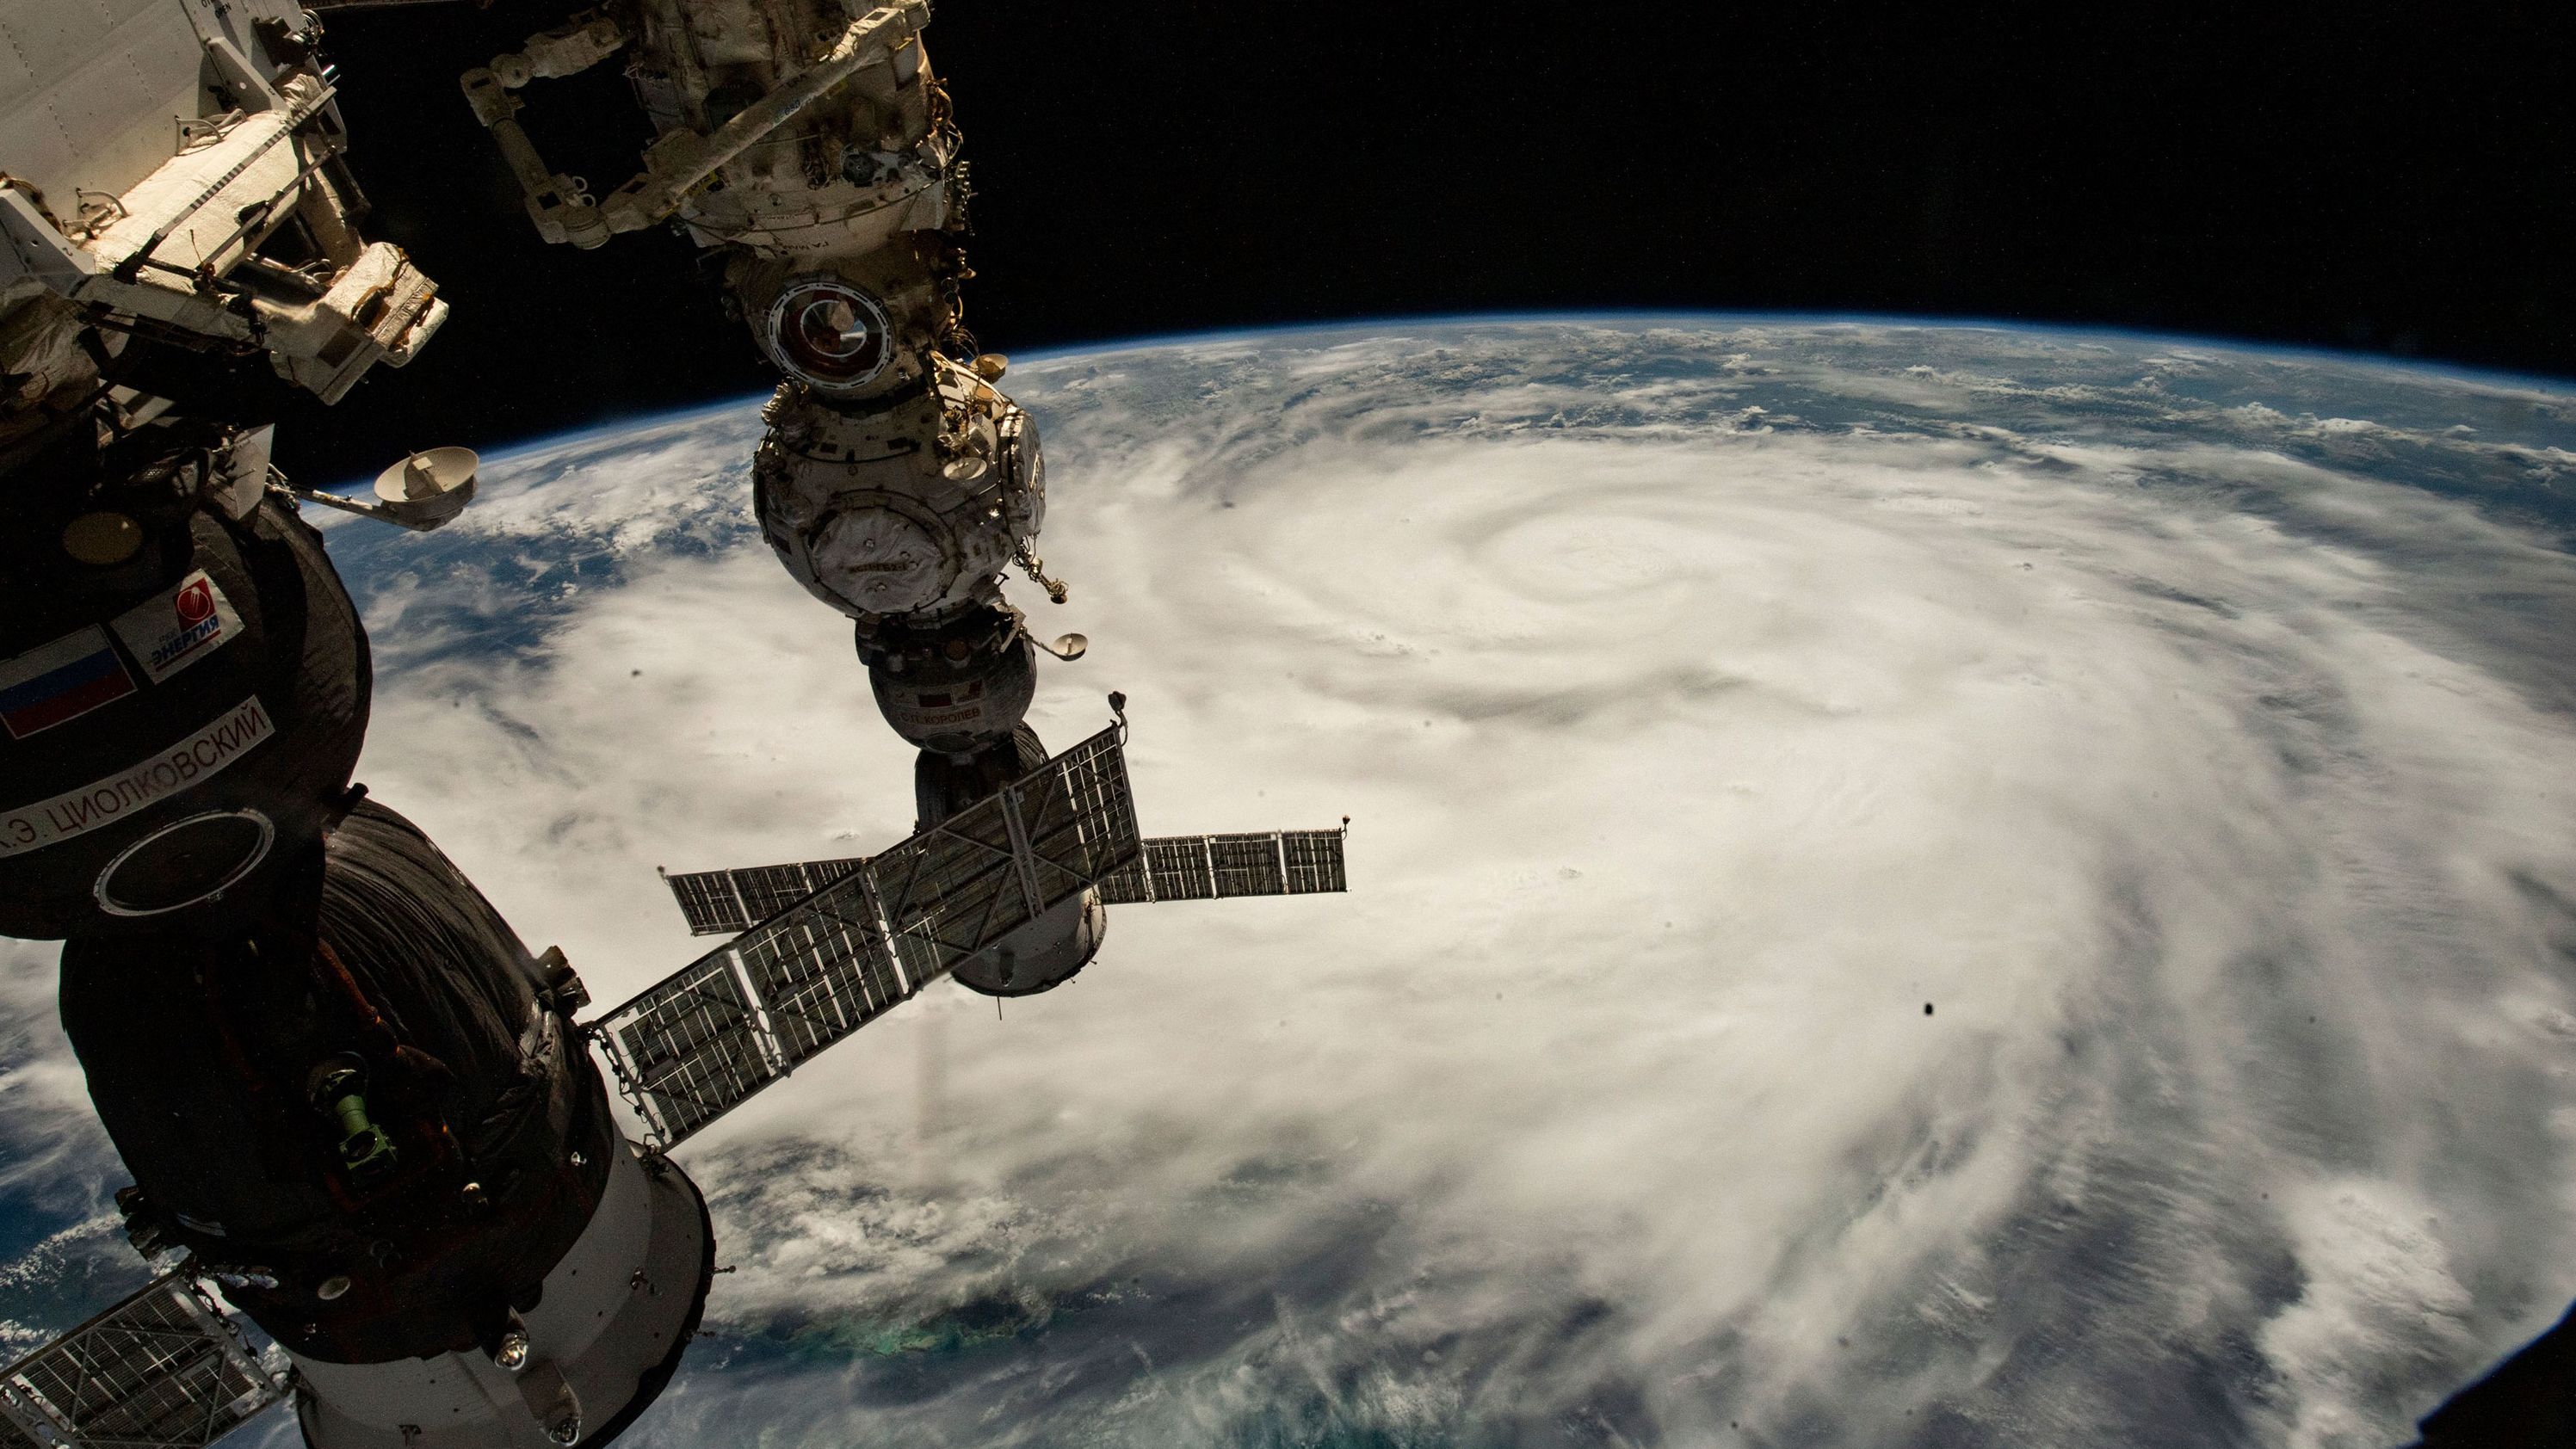 Hurricane Ian is seen from the International Space Station on Monday, September 26.